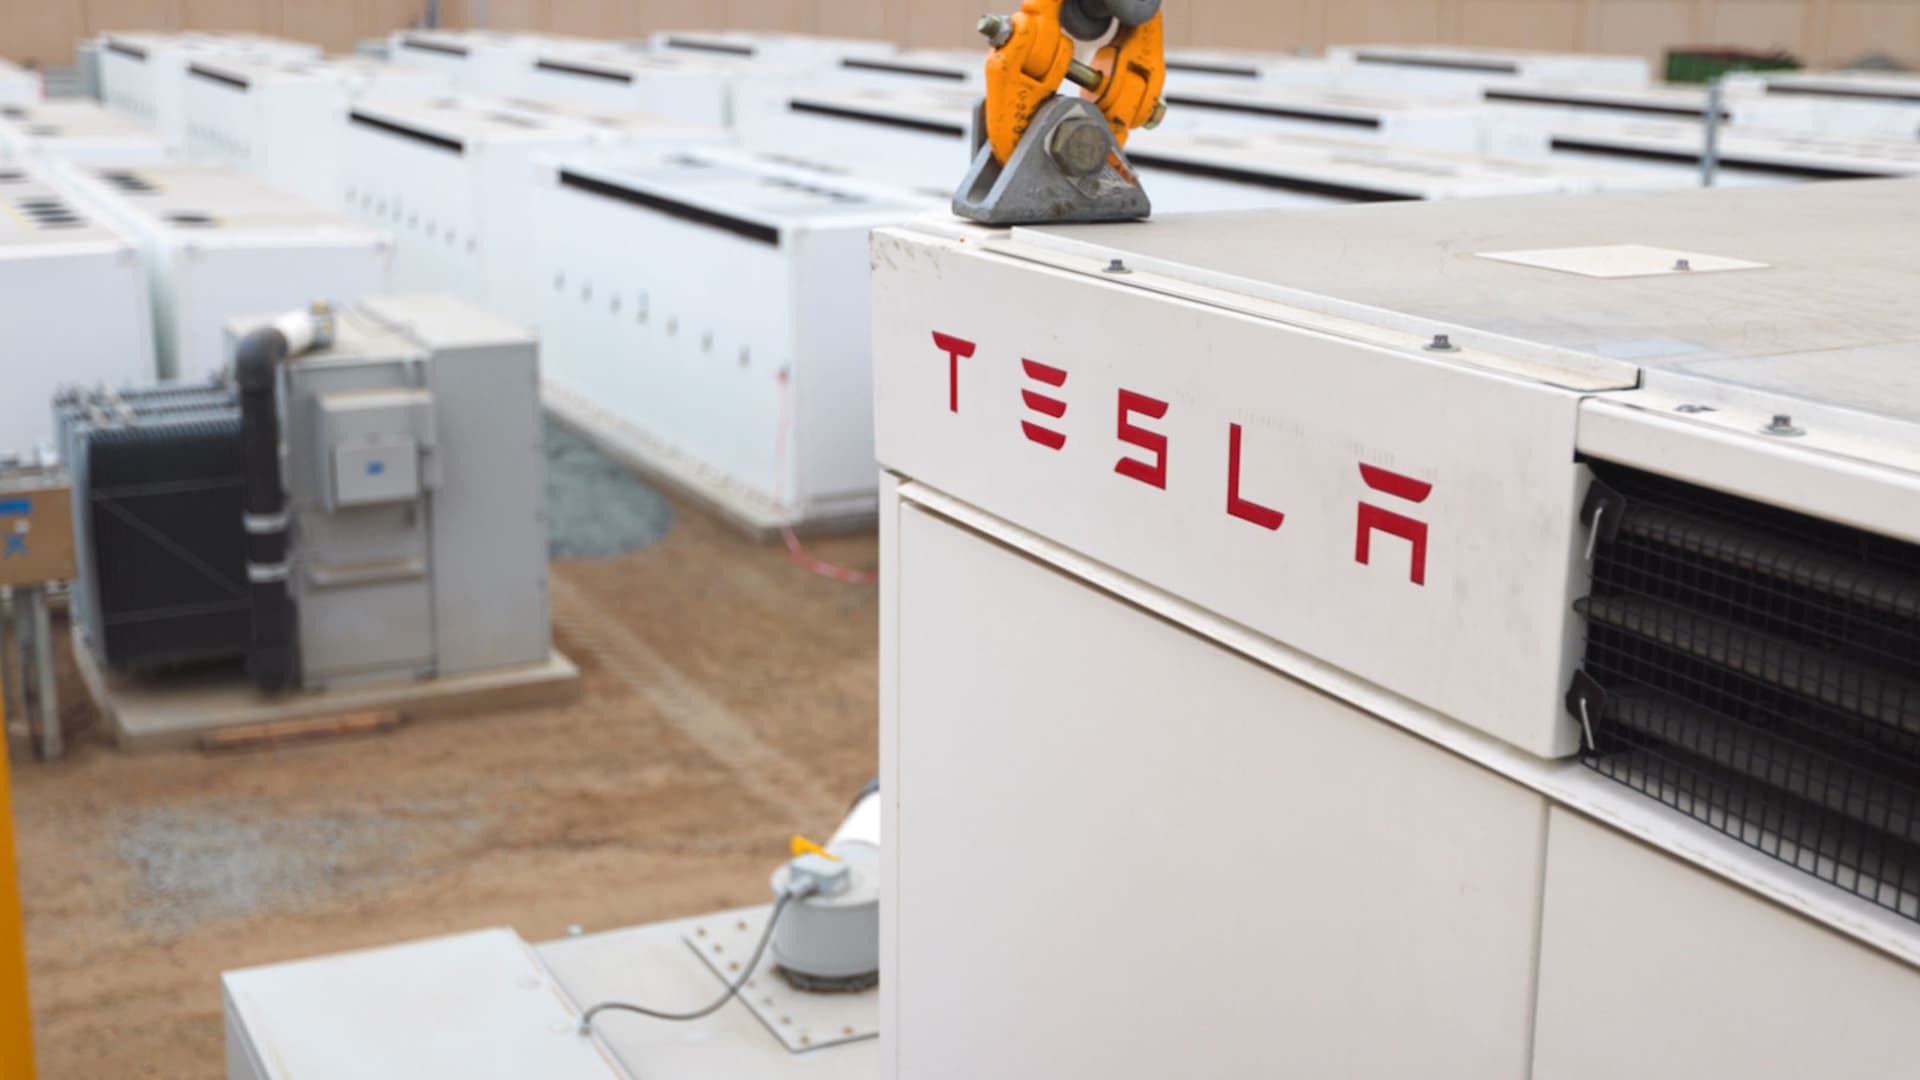 At least one Tesla Megapack caught fire early Tuesday morning at the energy storage facility operated by utility PG&E in Monterey, California. As 